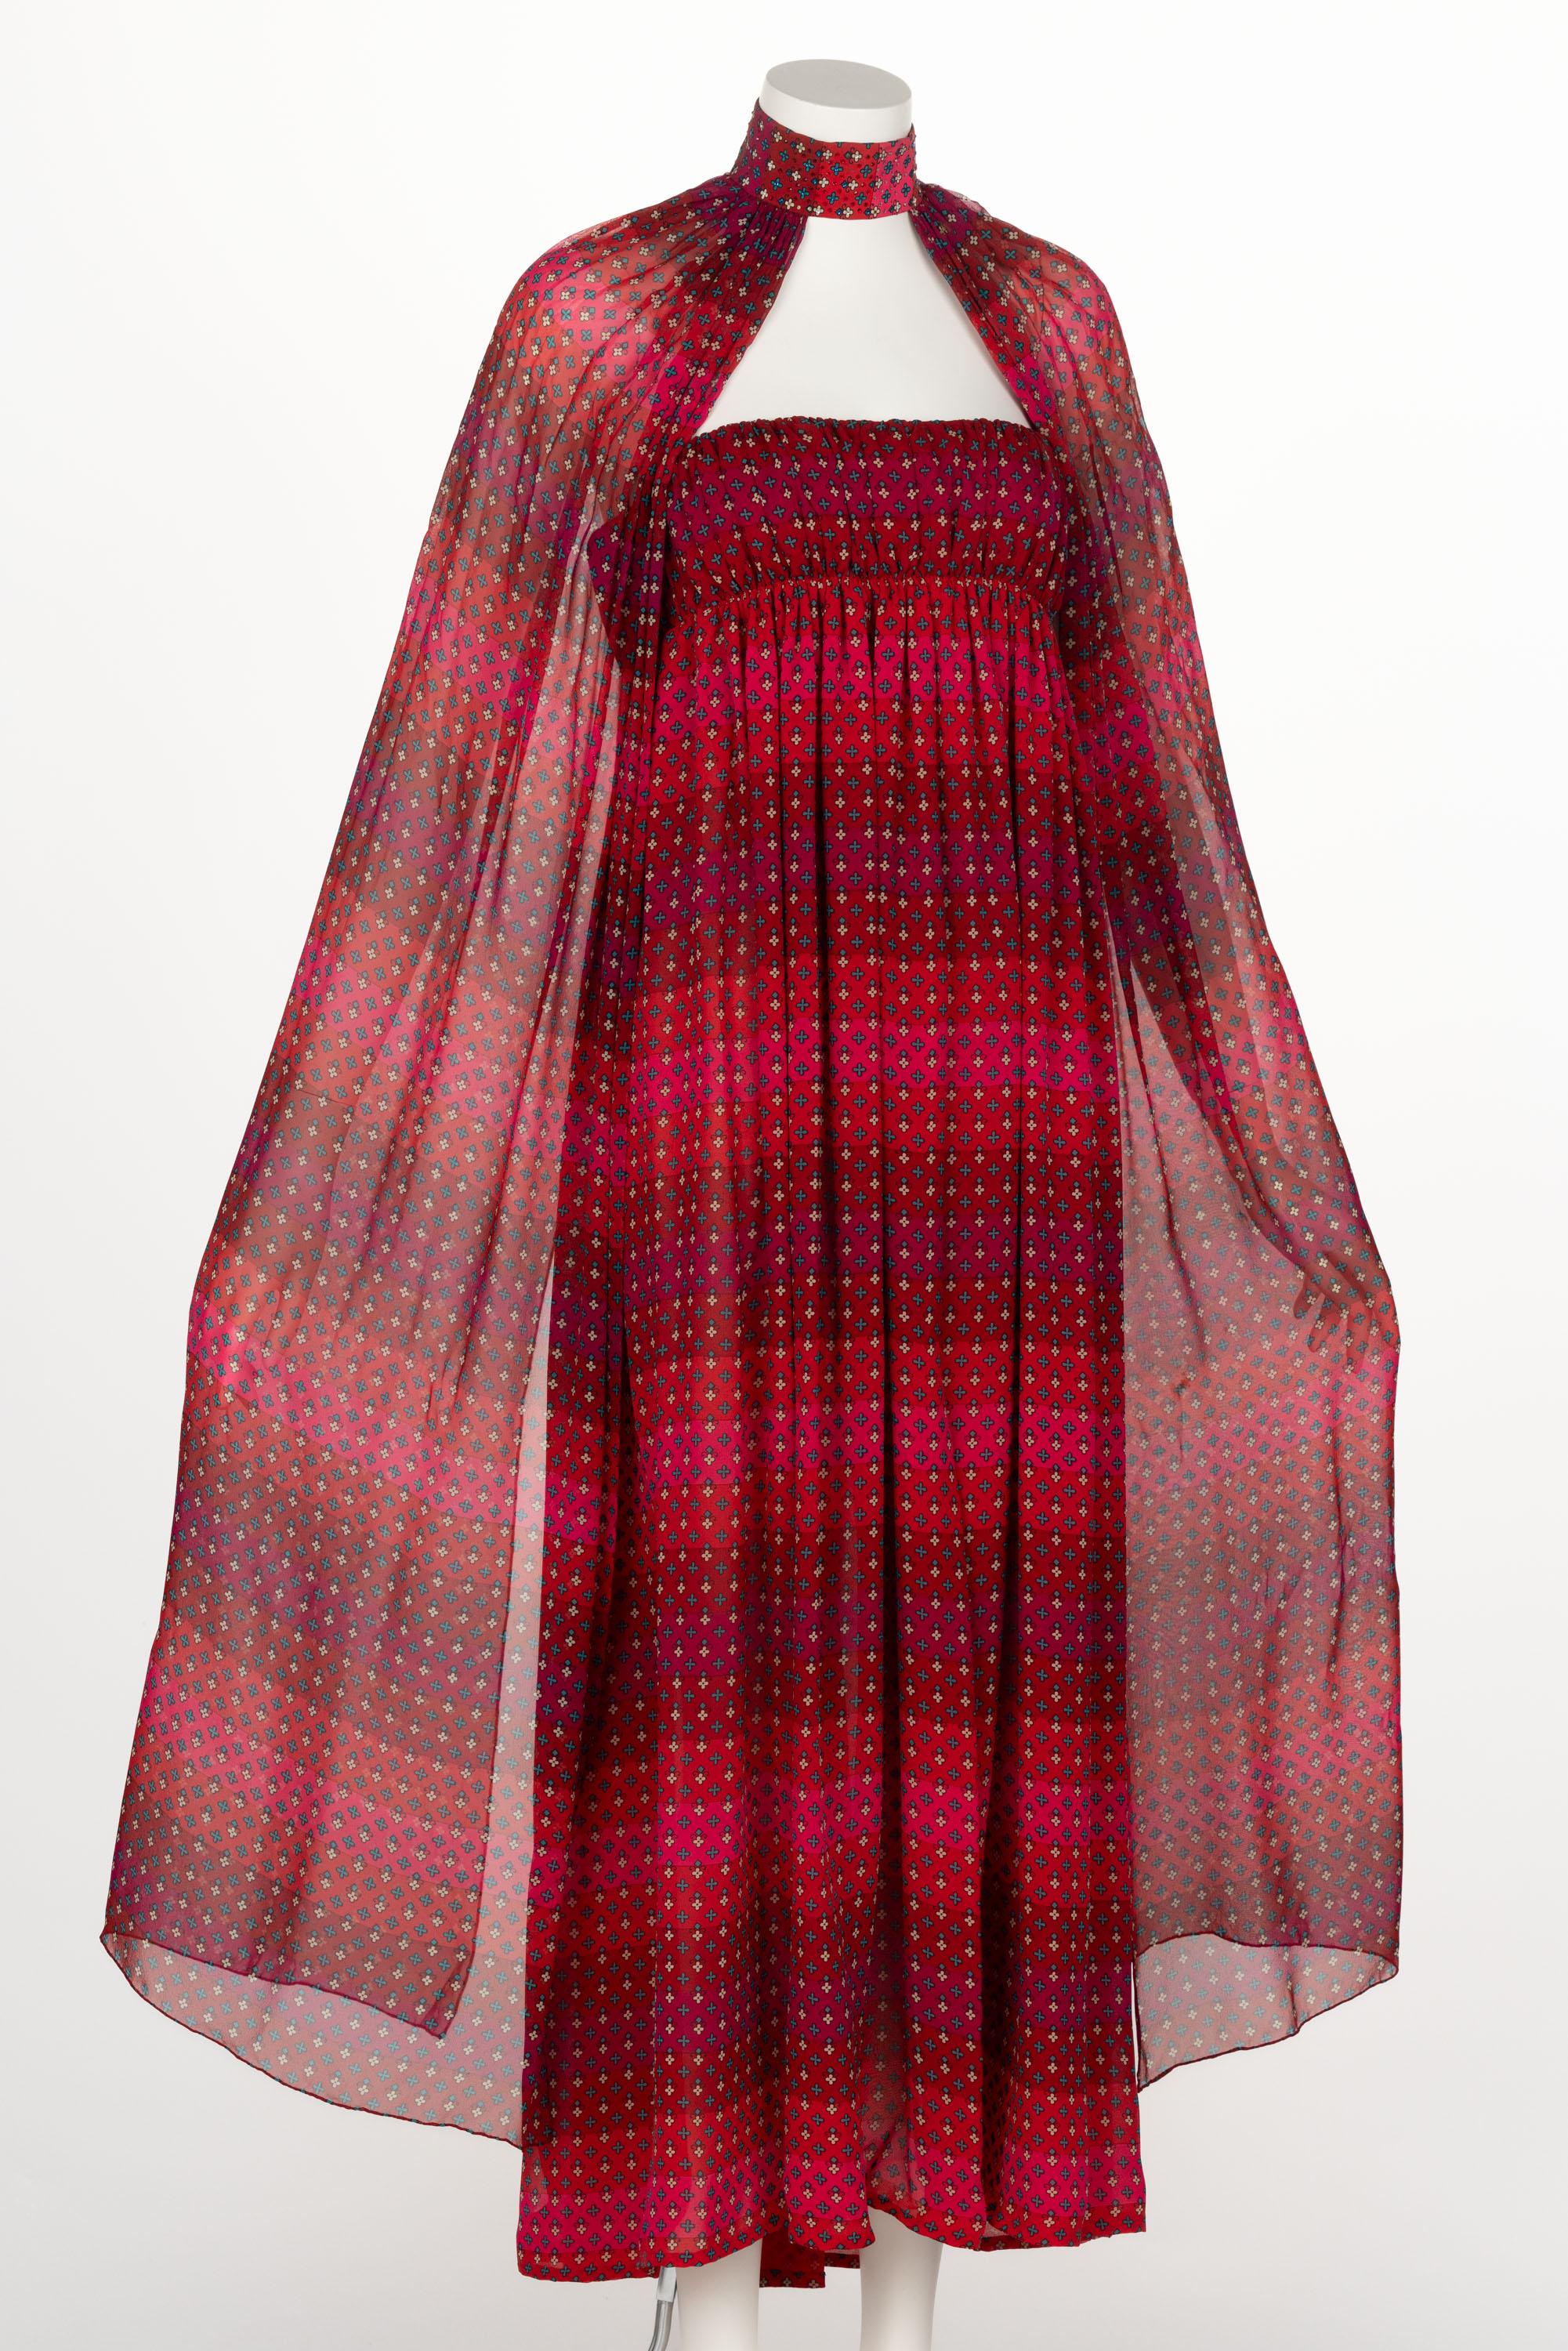 1970s  Pauline Trigère Red Print Strapless Dress & Cape Set In Excellent Condition For Sale In Boca Raton, FL